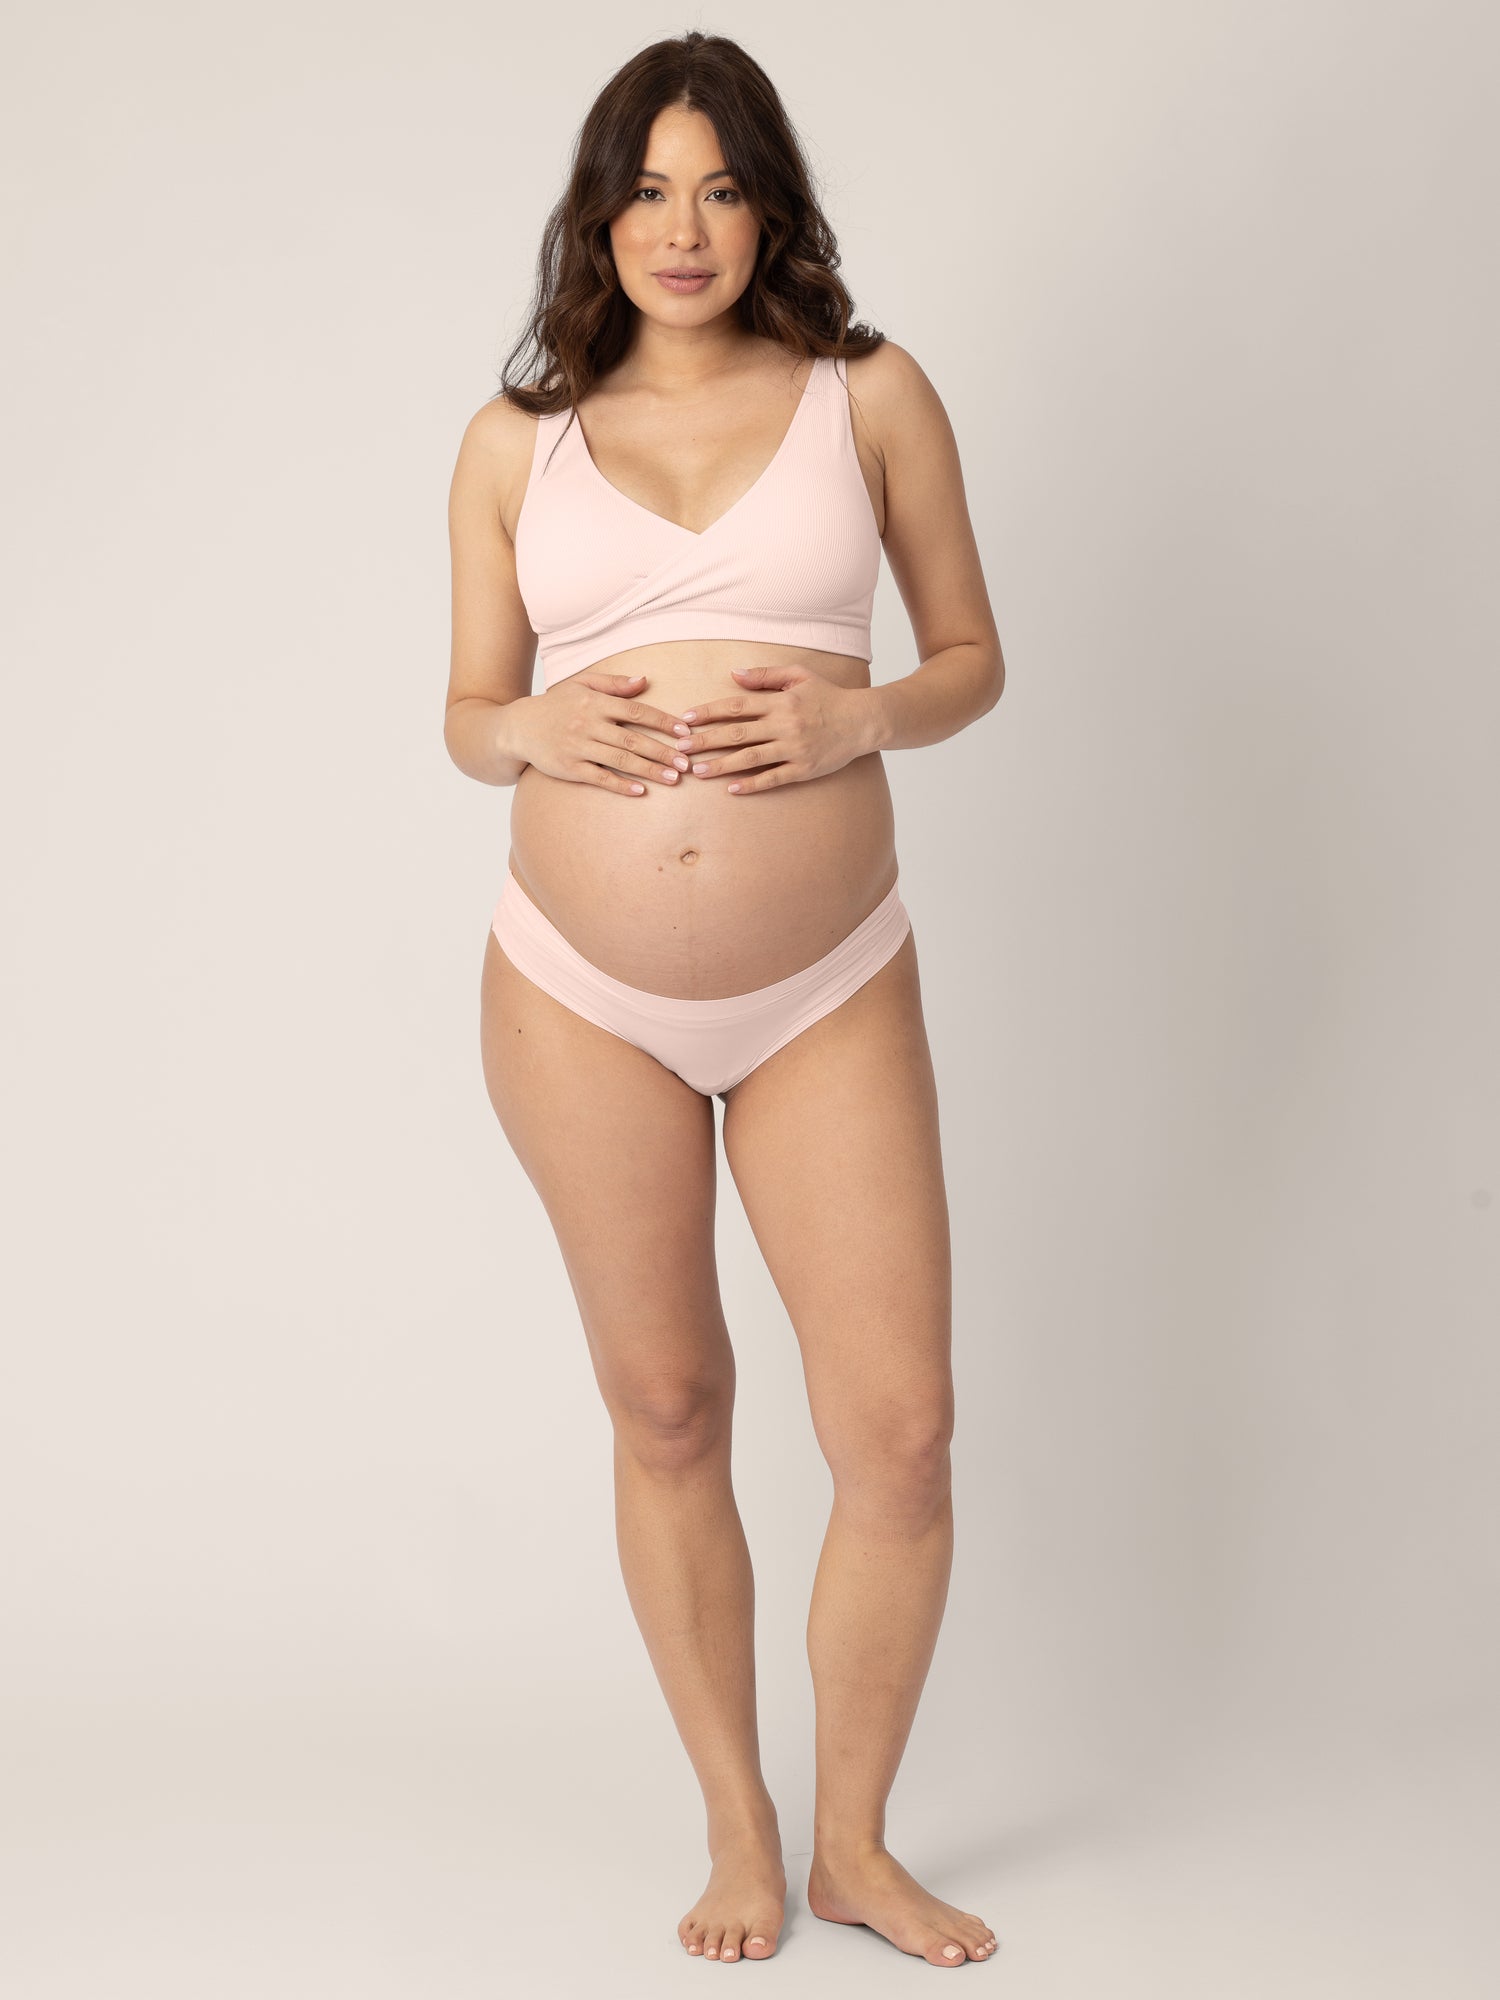 Pregnant model wearing the Grow with Me™ Maternity & Postpartum Thong in Soft Pink holding her belly bump.